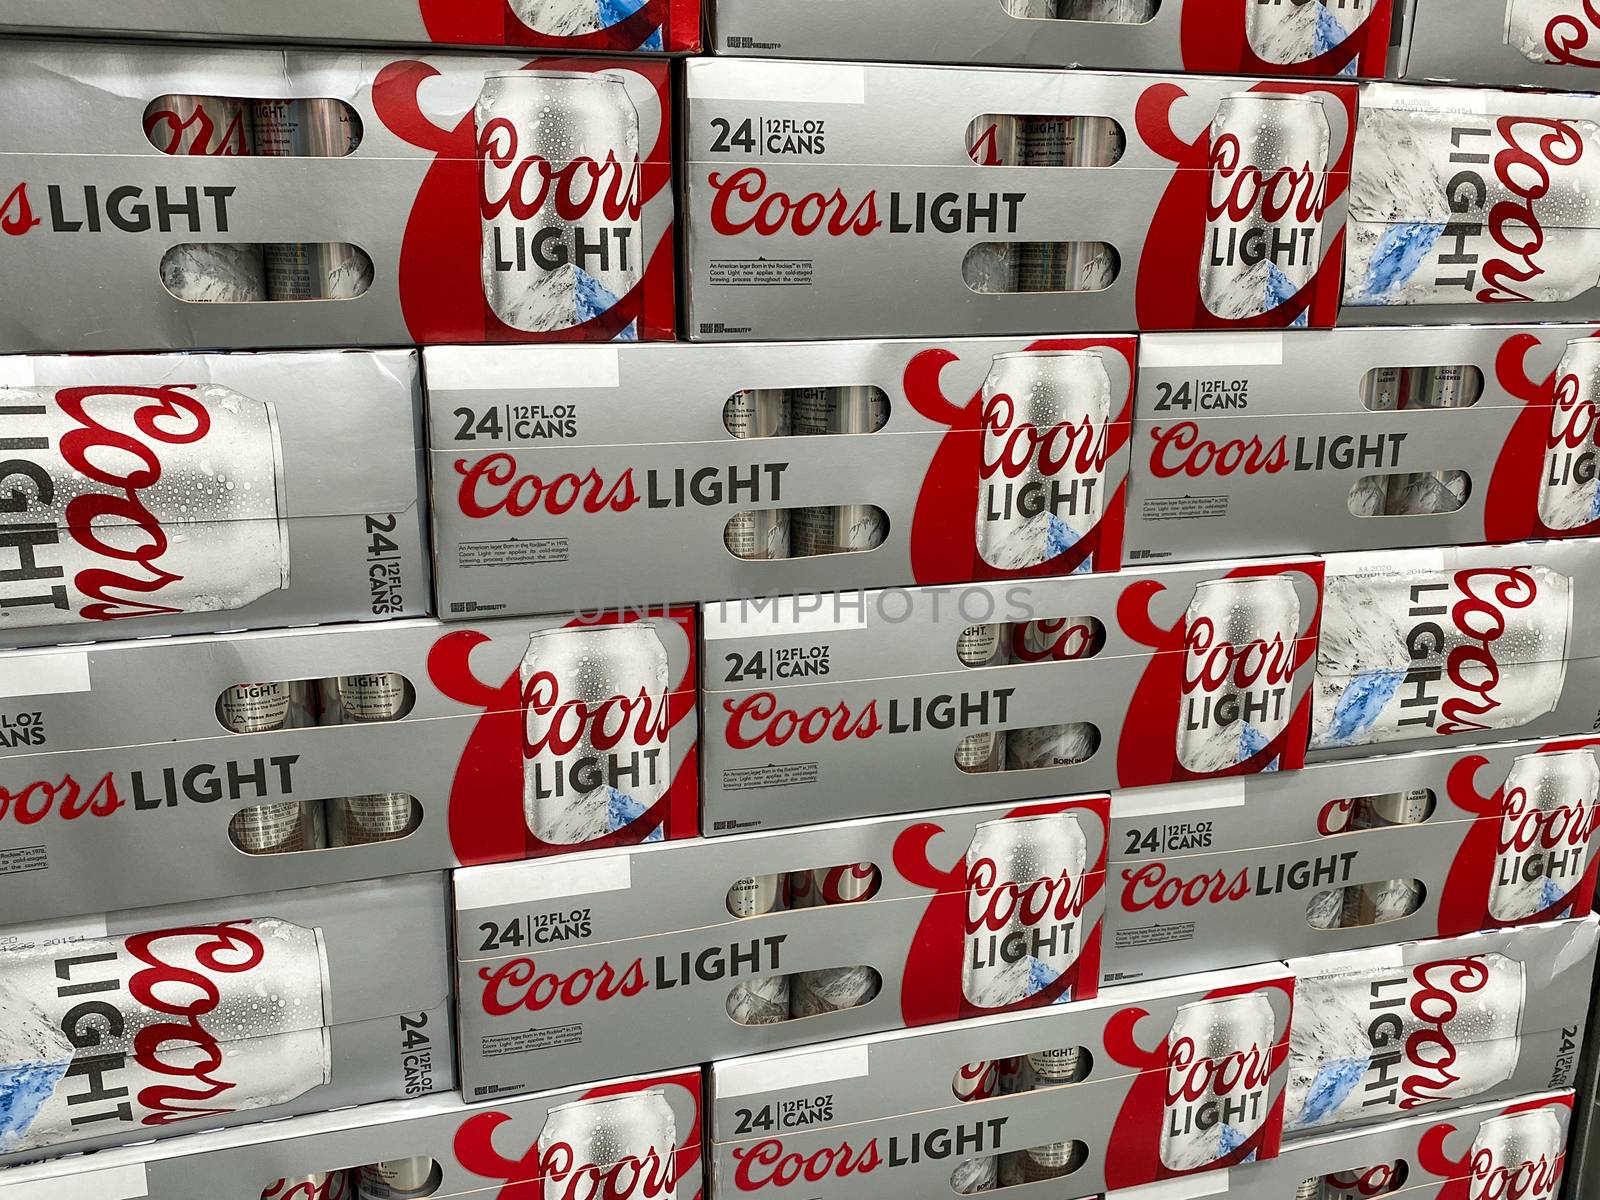 Cases of cans of Coors Light Beer at a grocery store by Jshanebutt